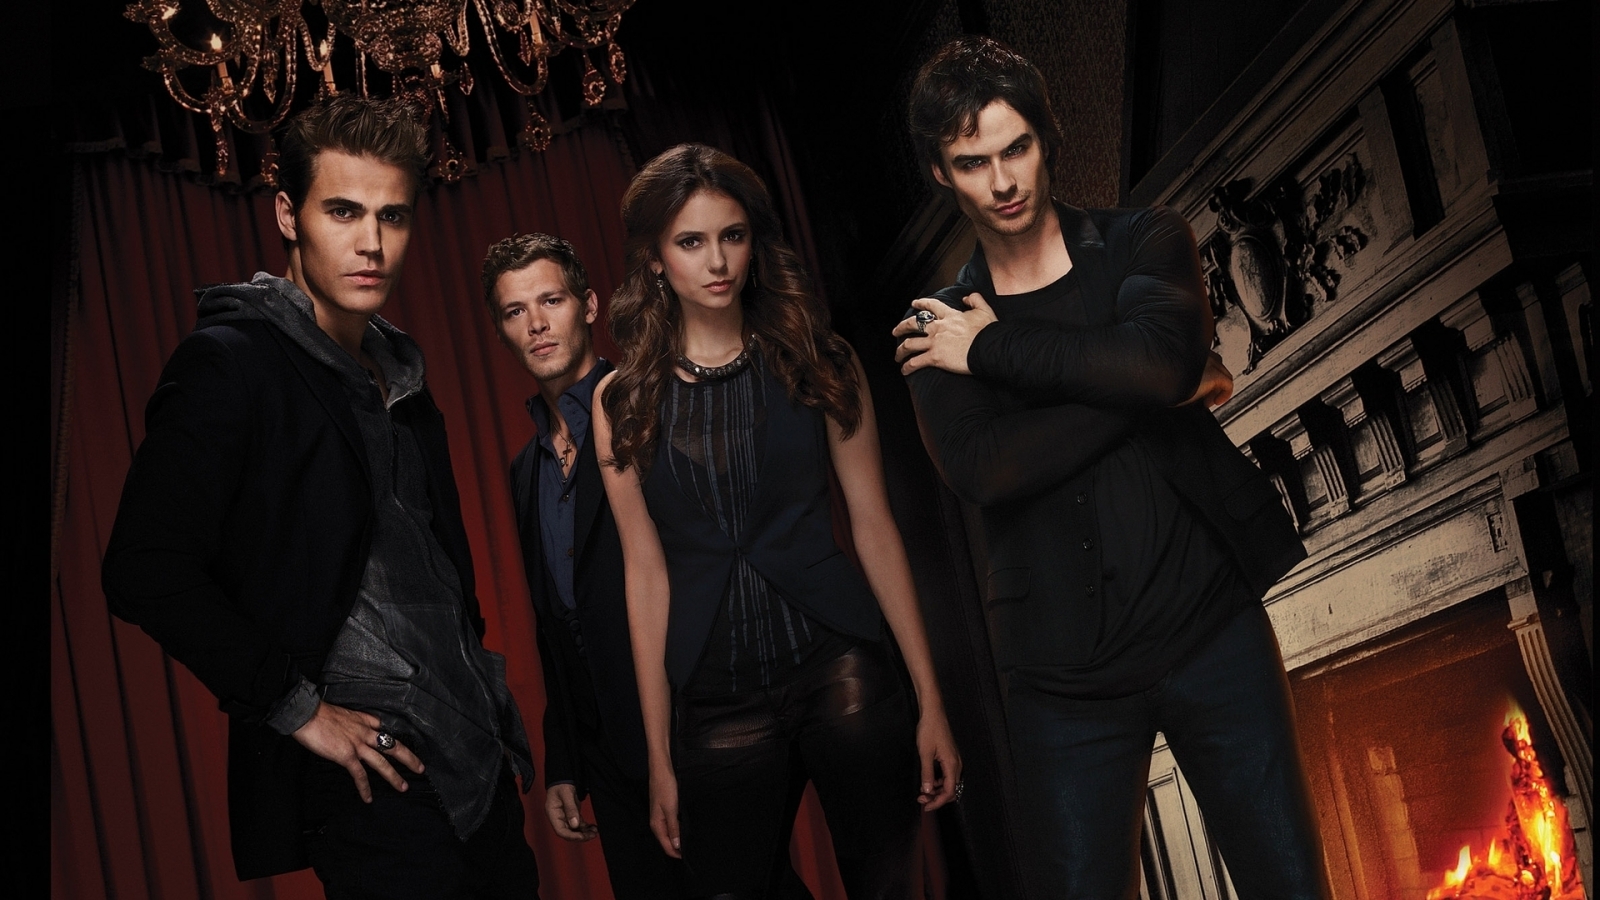 The Vampire Diaries Actors for 1600 x 900 HDTV resolution